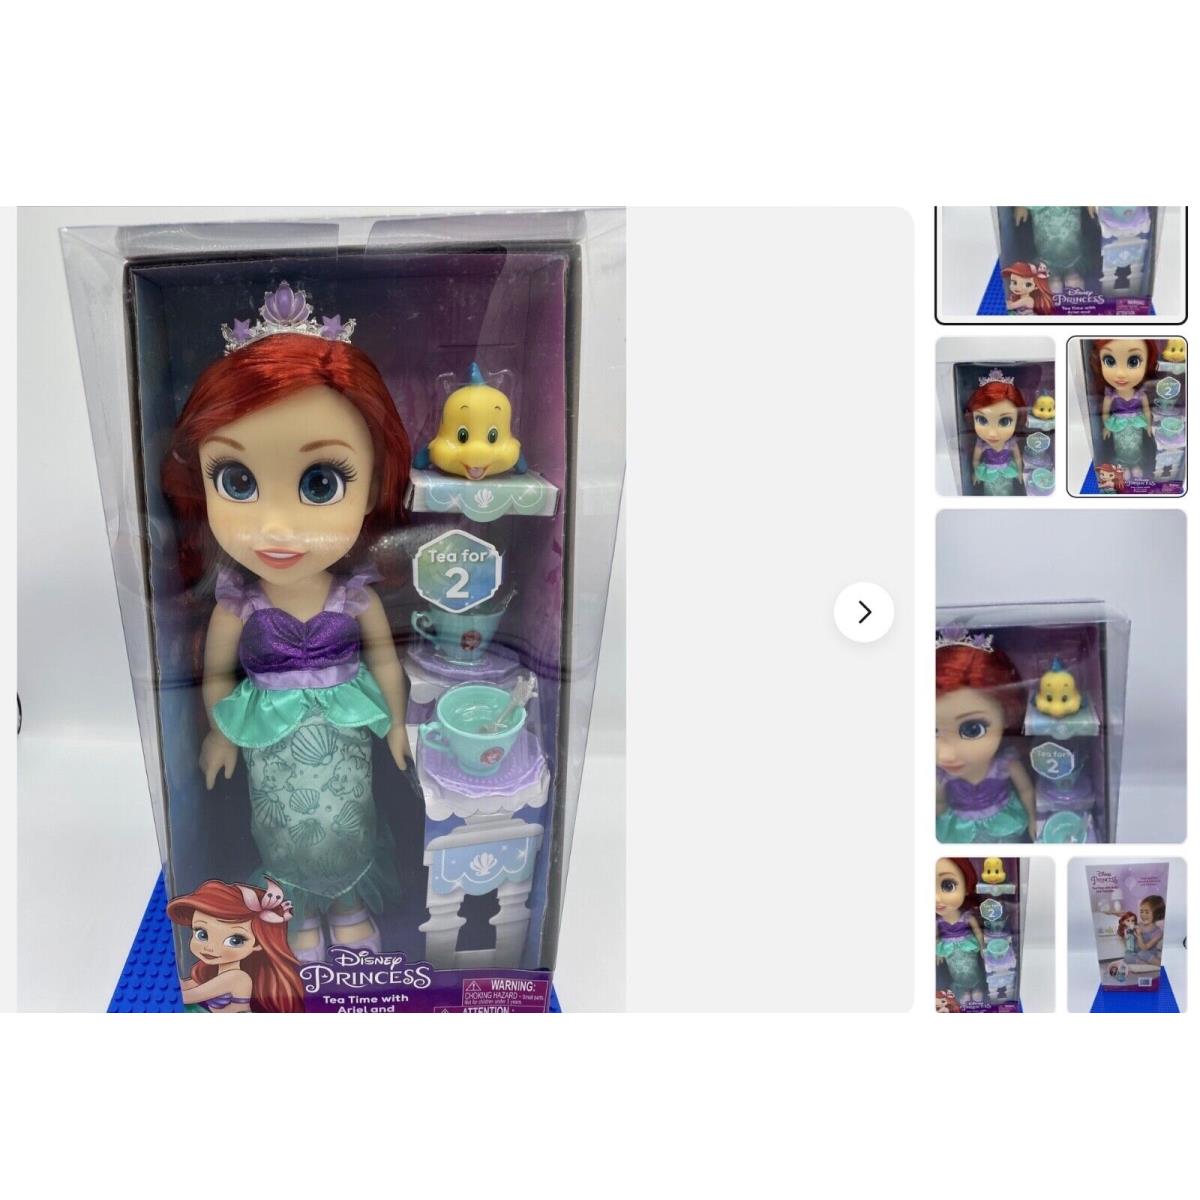 Disney Princess Tea Time For Two with 14 Inch Doll Pet - Pick Your Favorite Ariel & Flounder